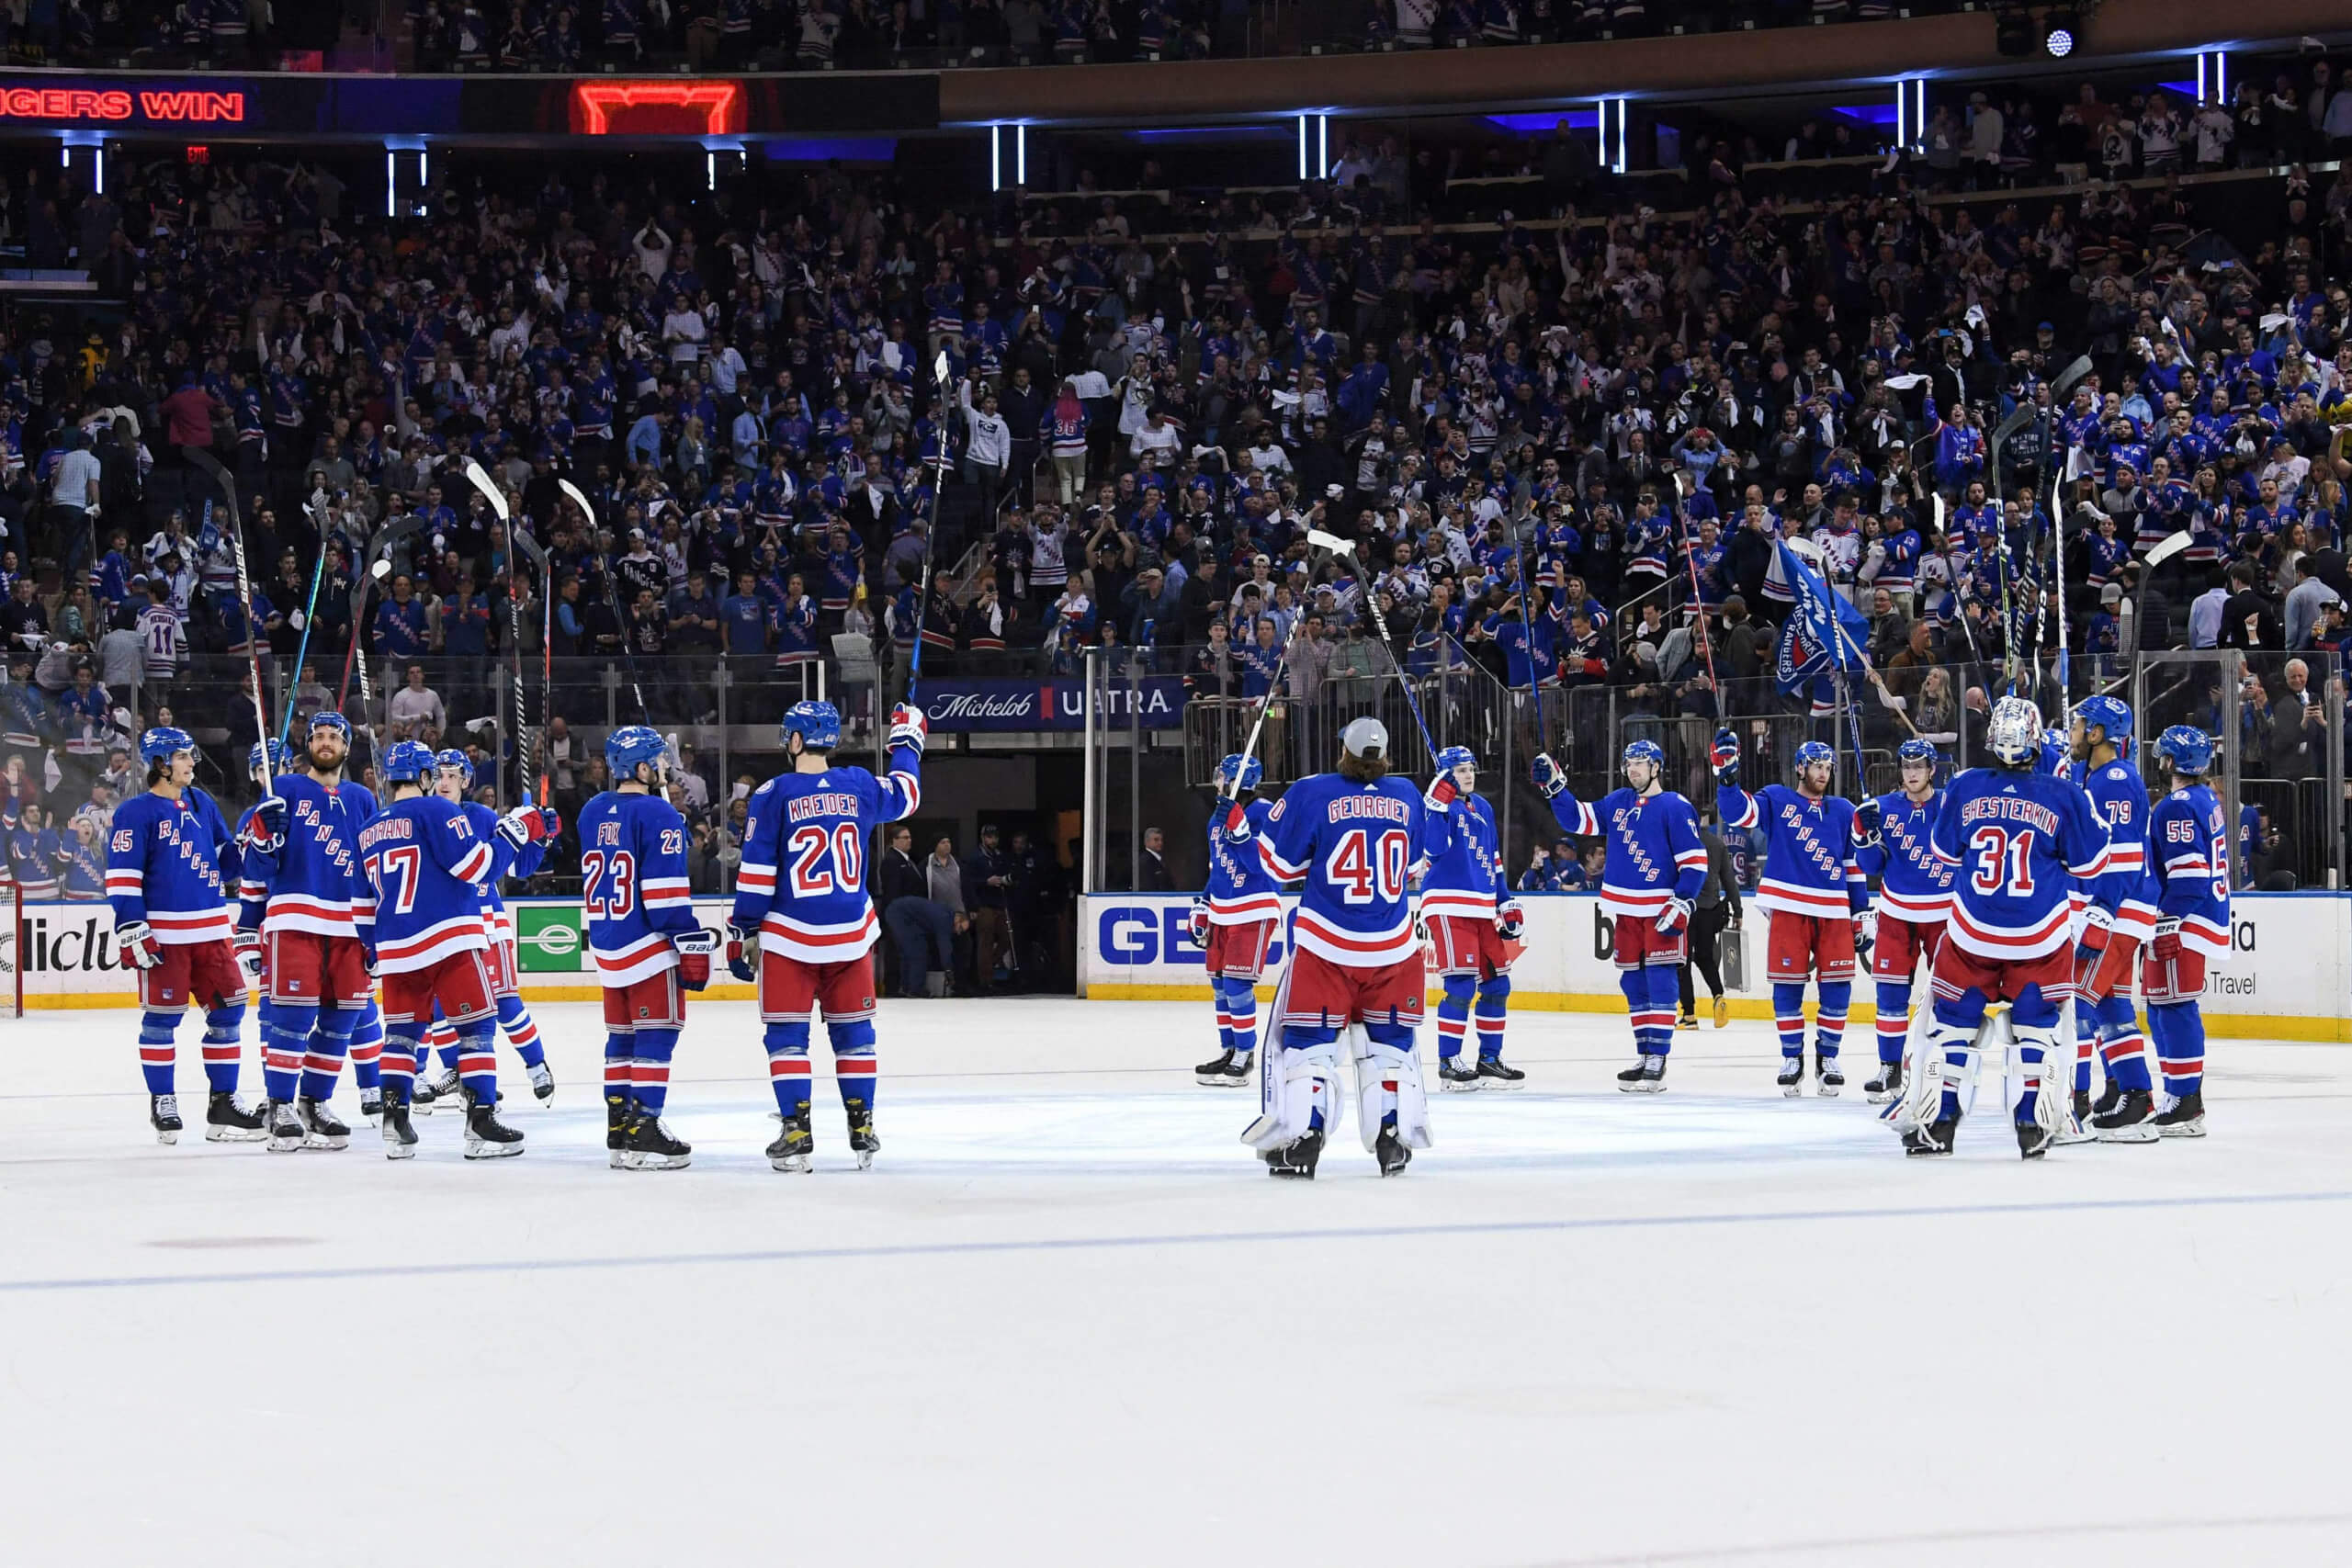 Kid Line helping Rangers get first series lead this playoffs